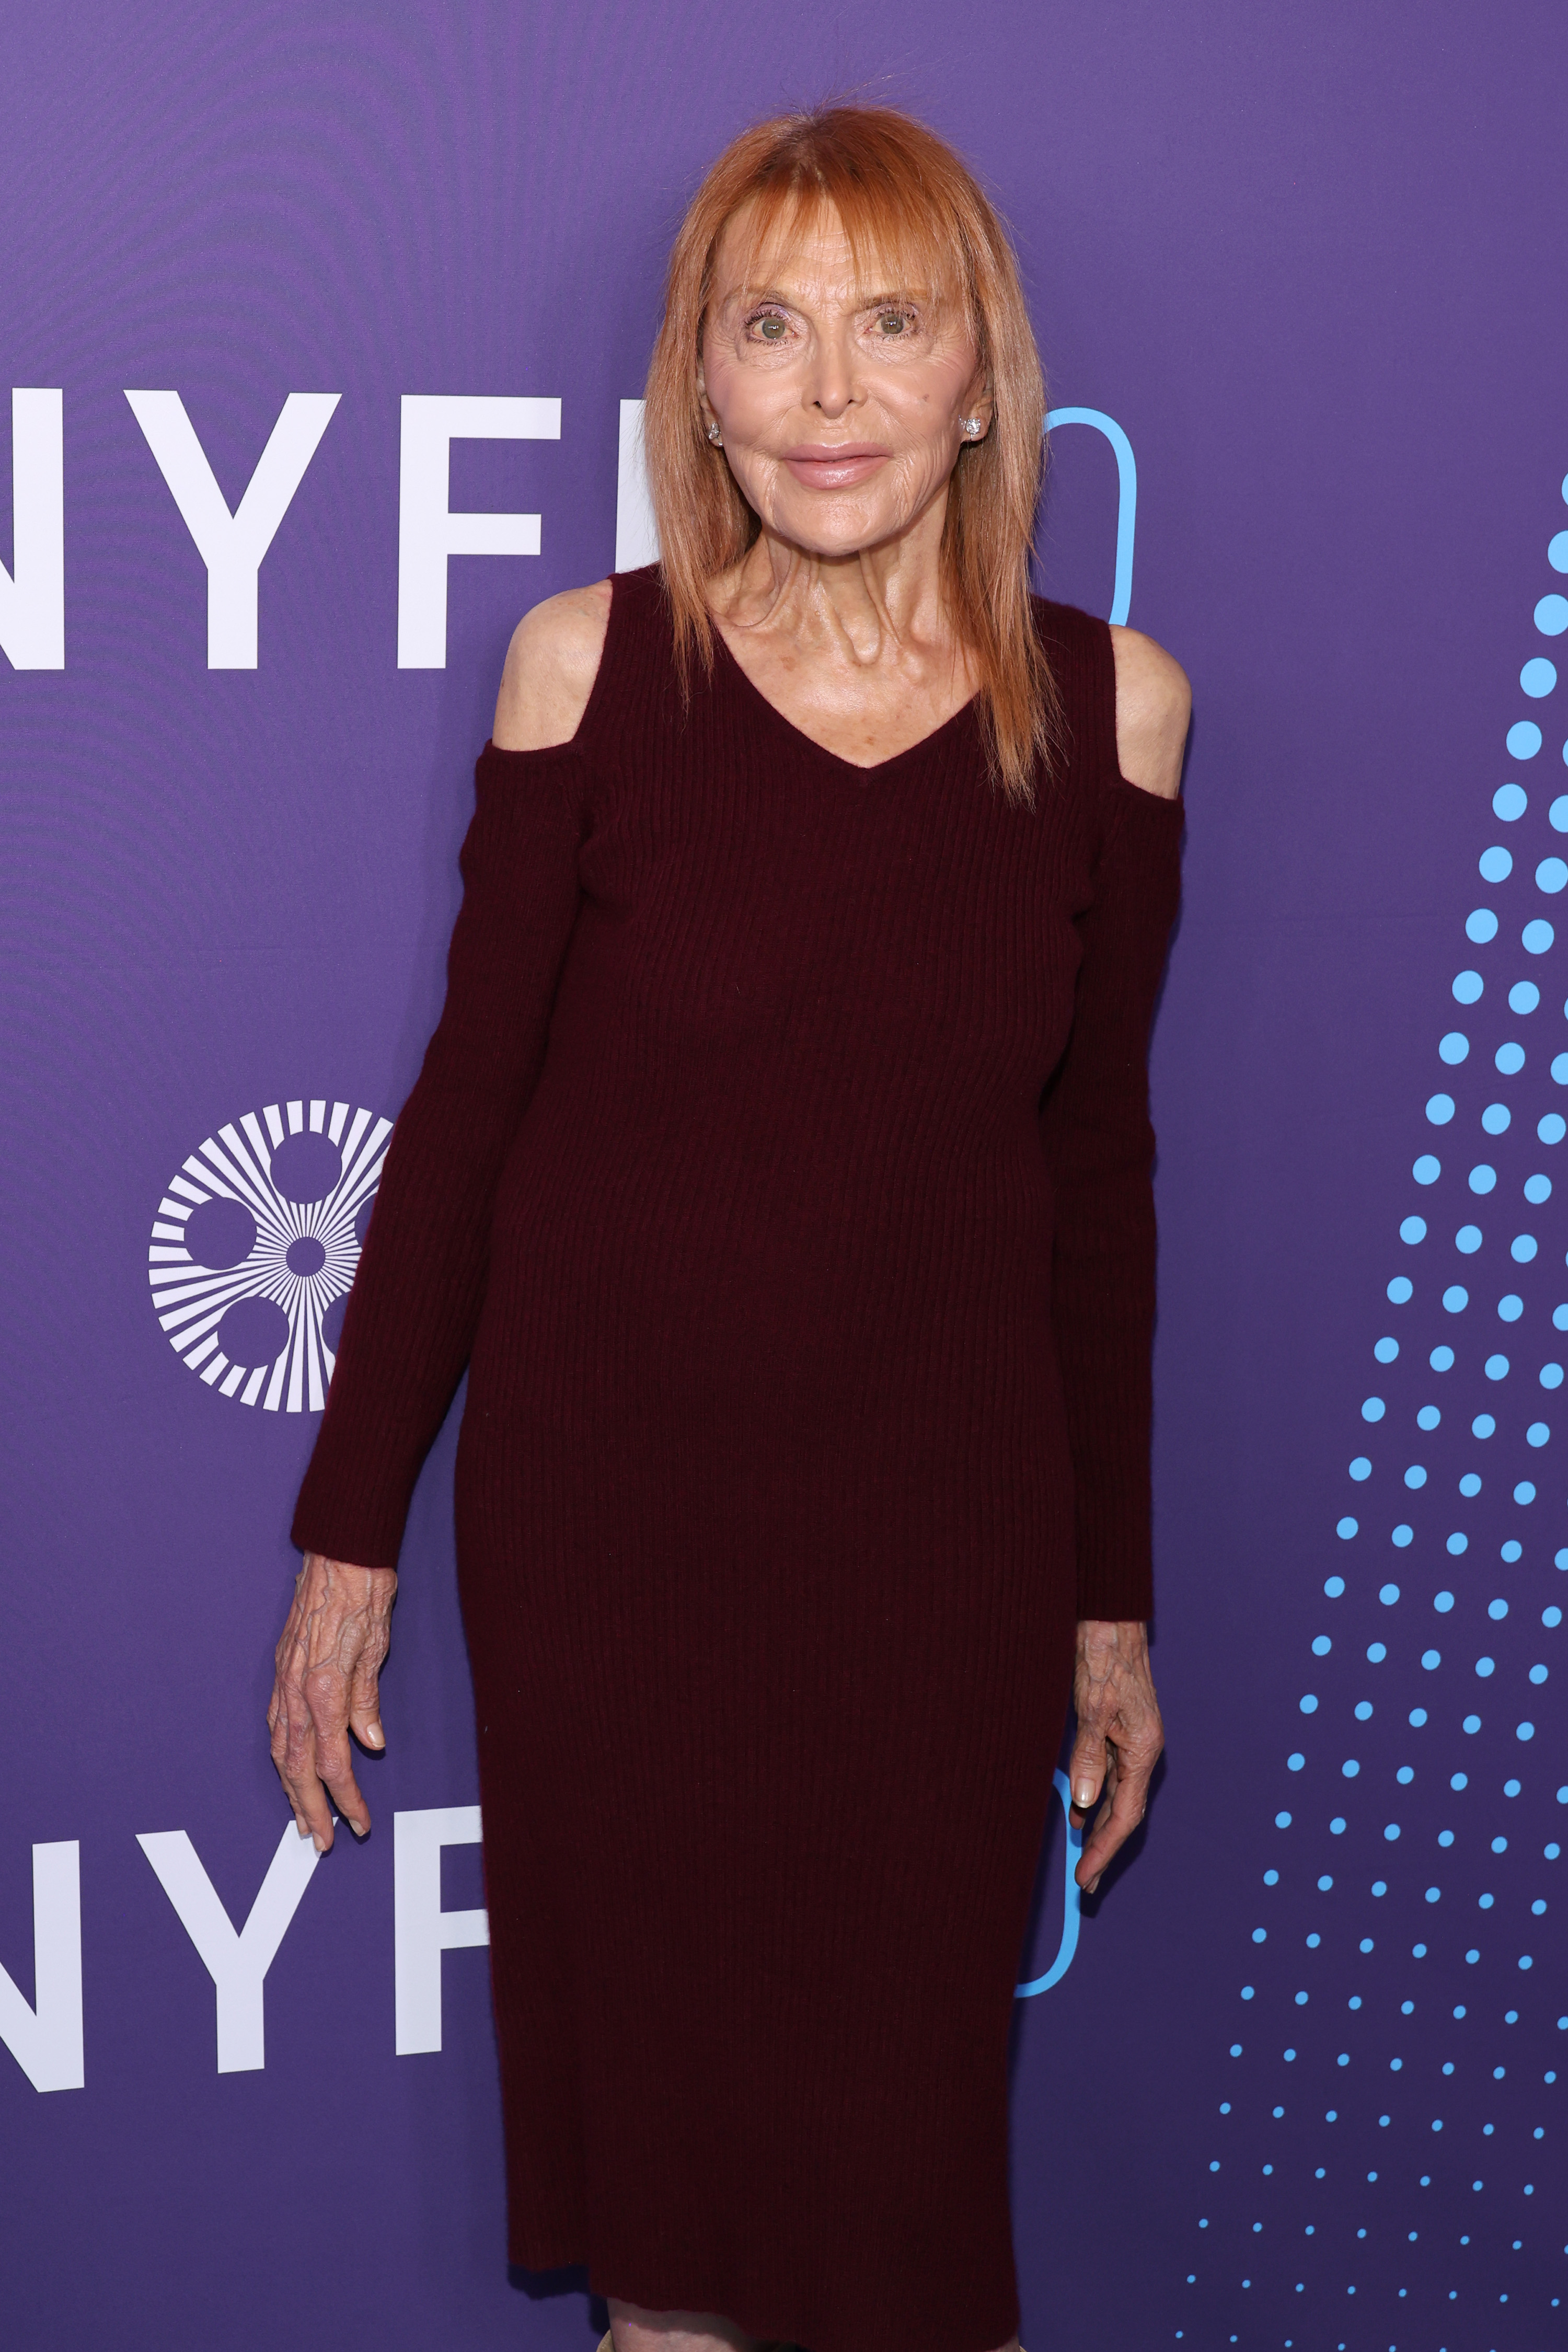 Tina Louise attends the red carpet event for "Women Talking" during the 60th New York Film Festival at Alice Tully Hall, Lincoln Center on October 10, 2022 in New York City. | Source: Getty Images